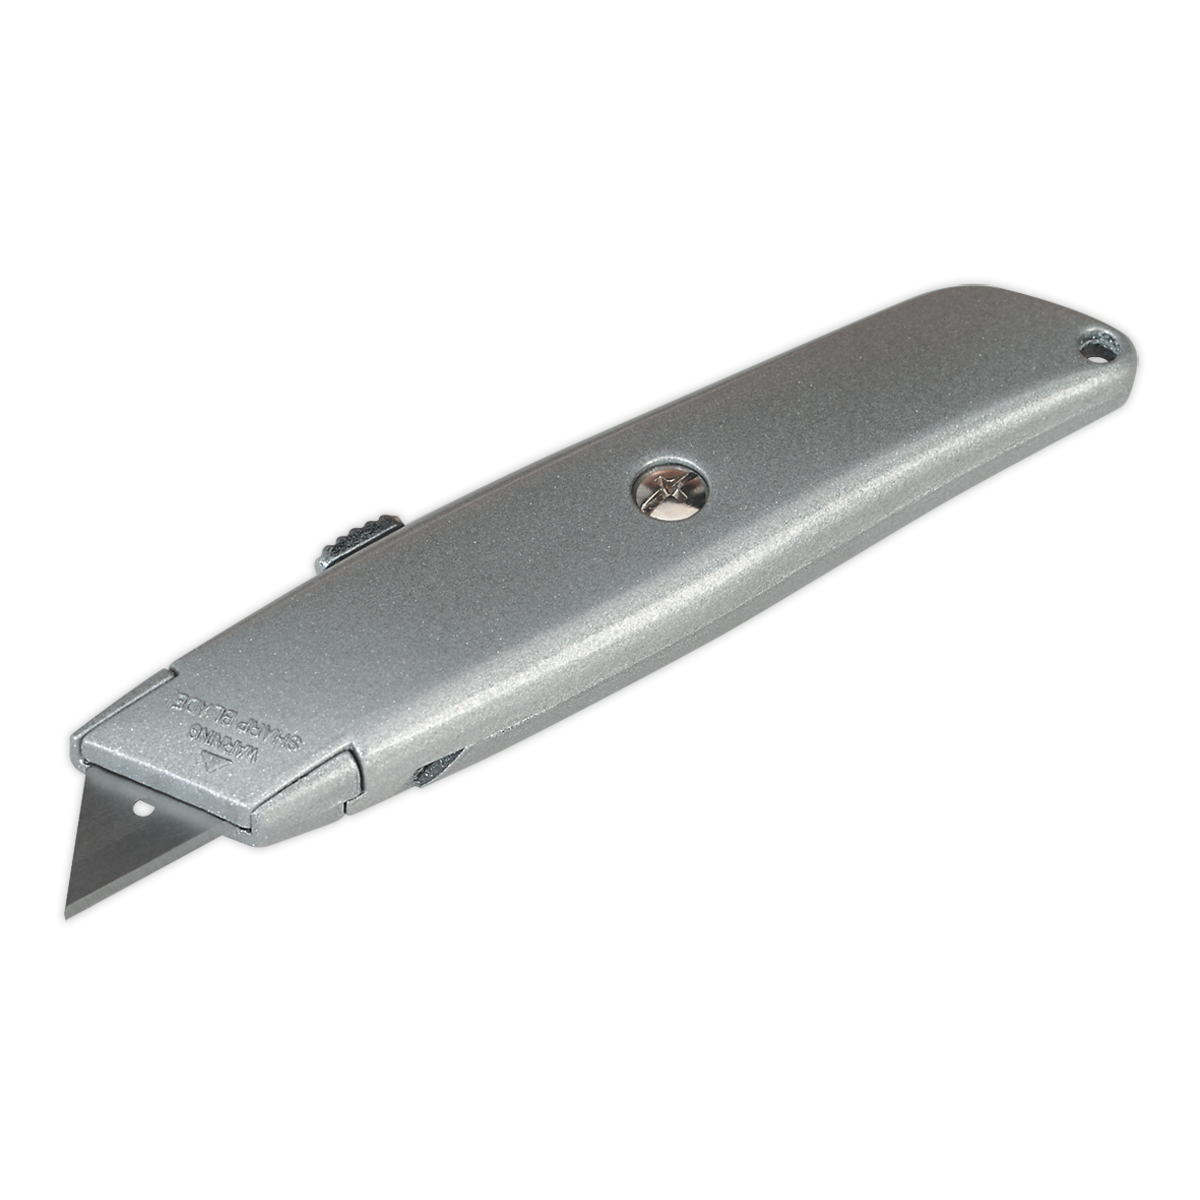 S0529 - Retractable Utility Knife